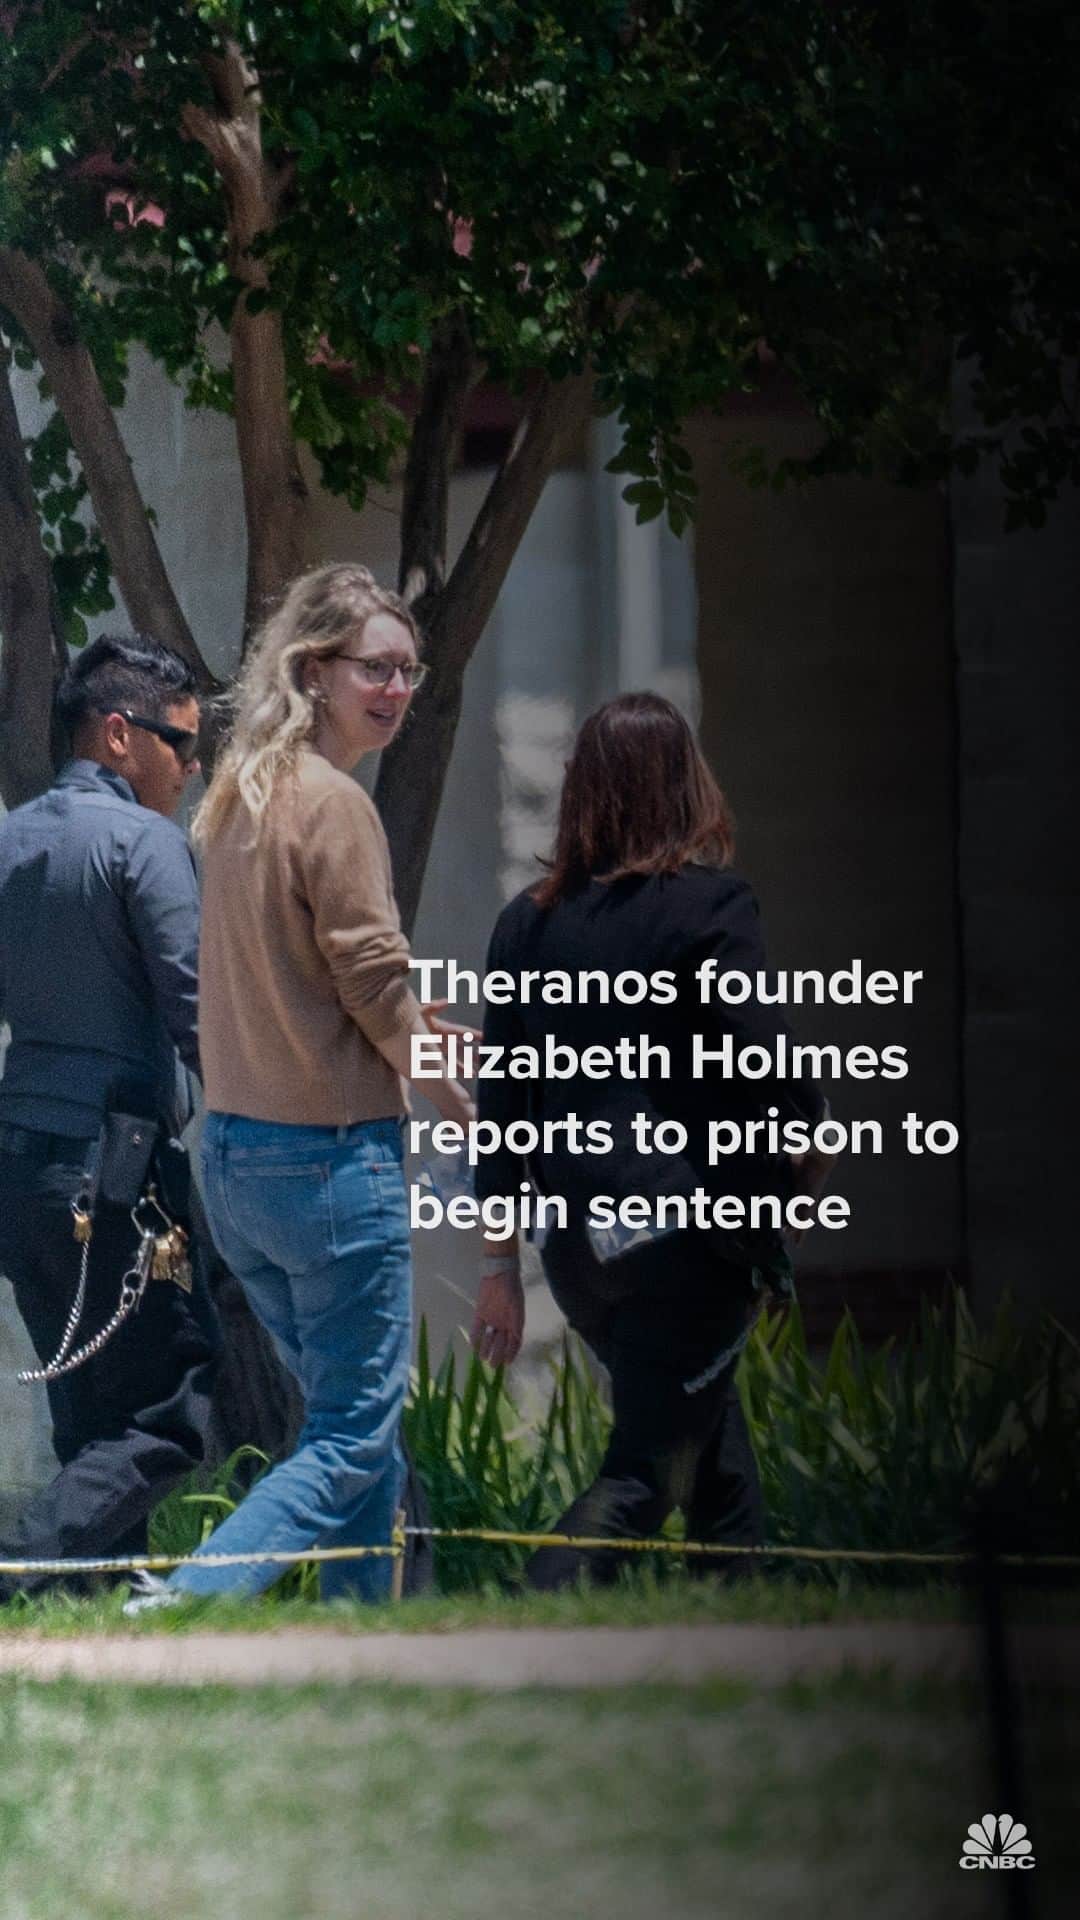 CNBCのインスタグラム：「Disgraced Theranos CEO Elizabeth Holmes reported to prison Tuesday to begin her more than 11-year sentence for defrauding investors about the capabilities of her company's blood-testing technology.  U.S. District Judge Edward Davila ordered Holmes to surrender no later than 2 p.m. local time Tuesday at a minimum-security facility in Bryan, Texas, in a ruling earlier this month. The ruling followed a day after an appeals court rejected Holmes' bid to stay out of prison while she appeals her conviction.  A federal jury in San Jose, California, convicted Holmes on four counts of defrauding investors in Theranos, the company she dropped out of Stanford University to found in 2003. In another ruling this month, Davila ordered Holmes and former Theranos executive Ramesh "Sunny" Balwani pay $452 million in restitution to victims.  Full details: Link in bio.」